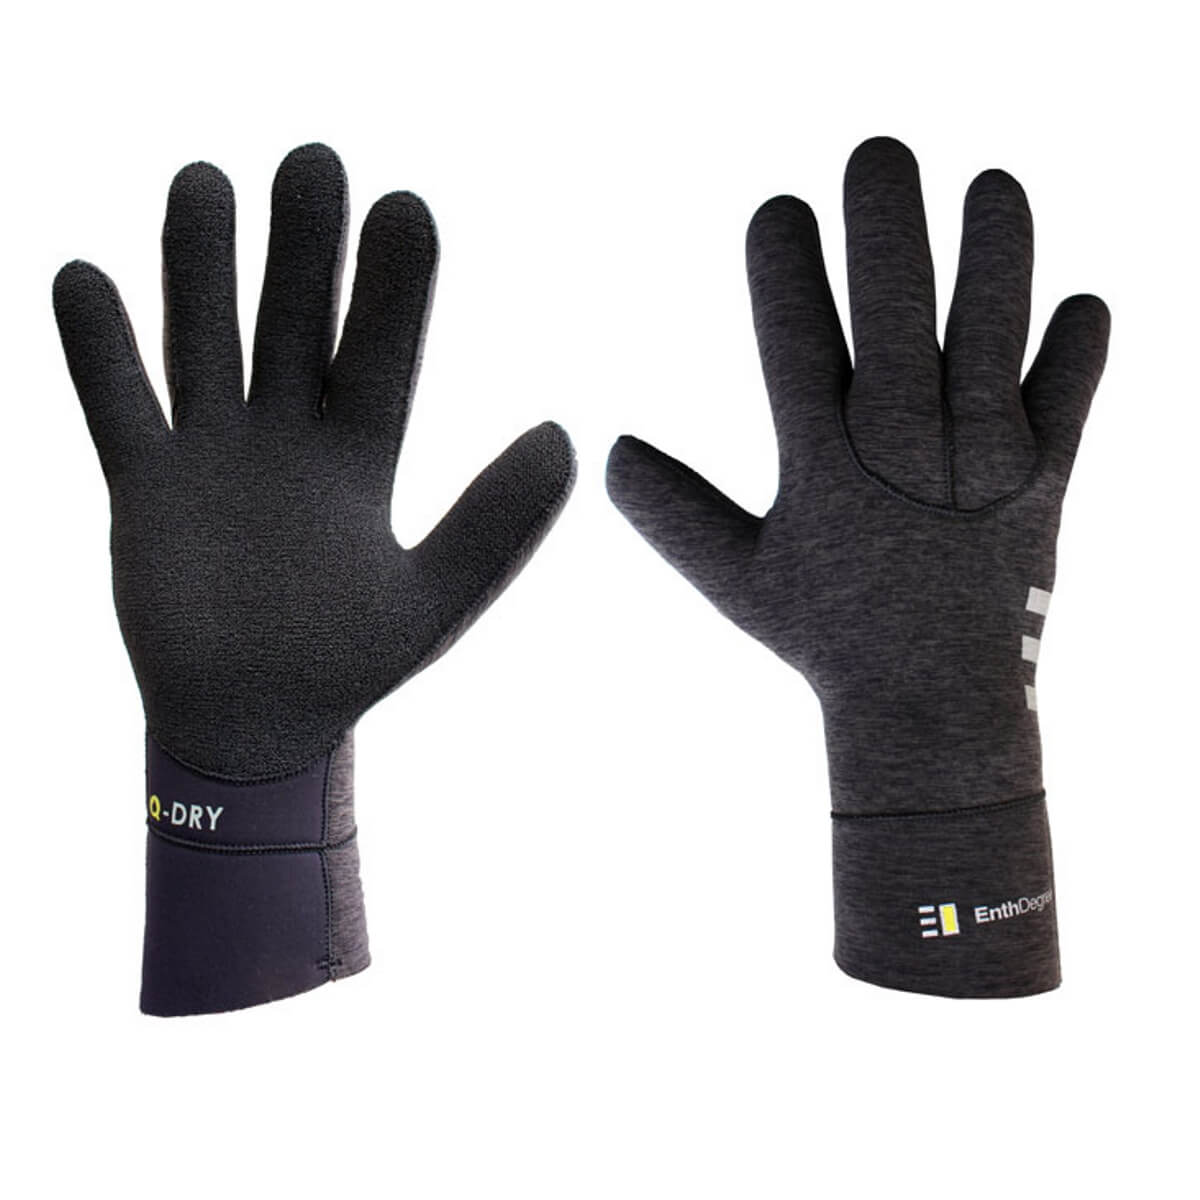 Enth Degree Quick Dry Handschuhe